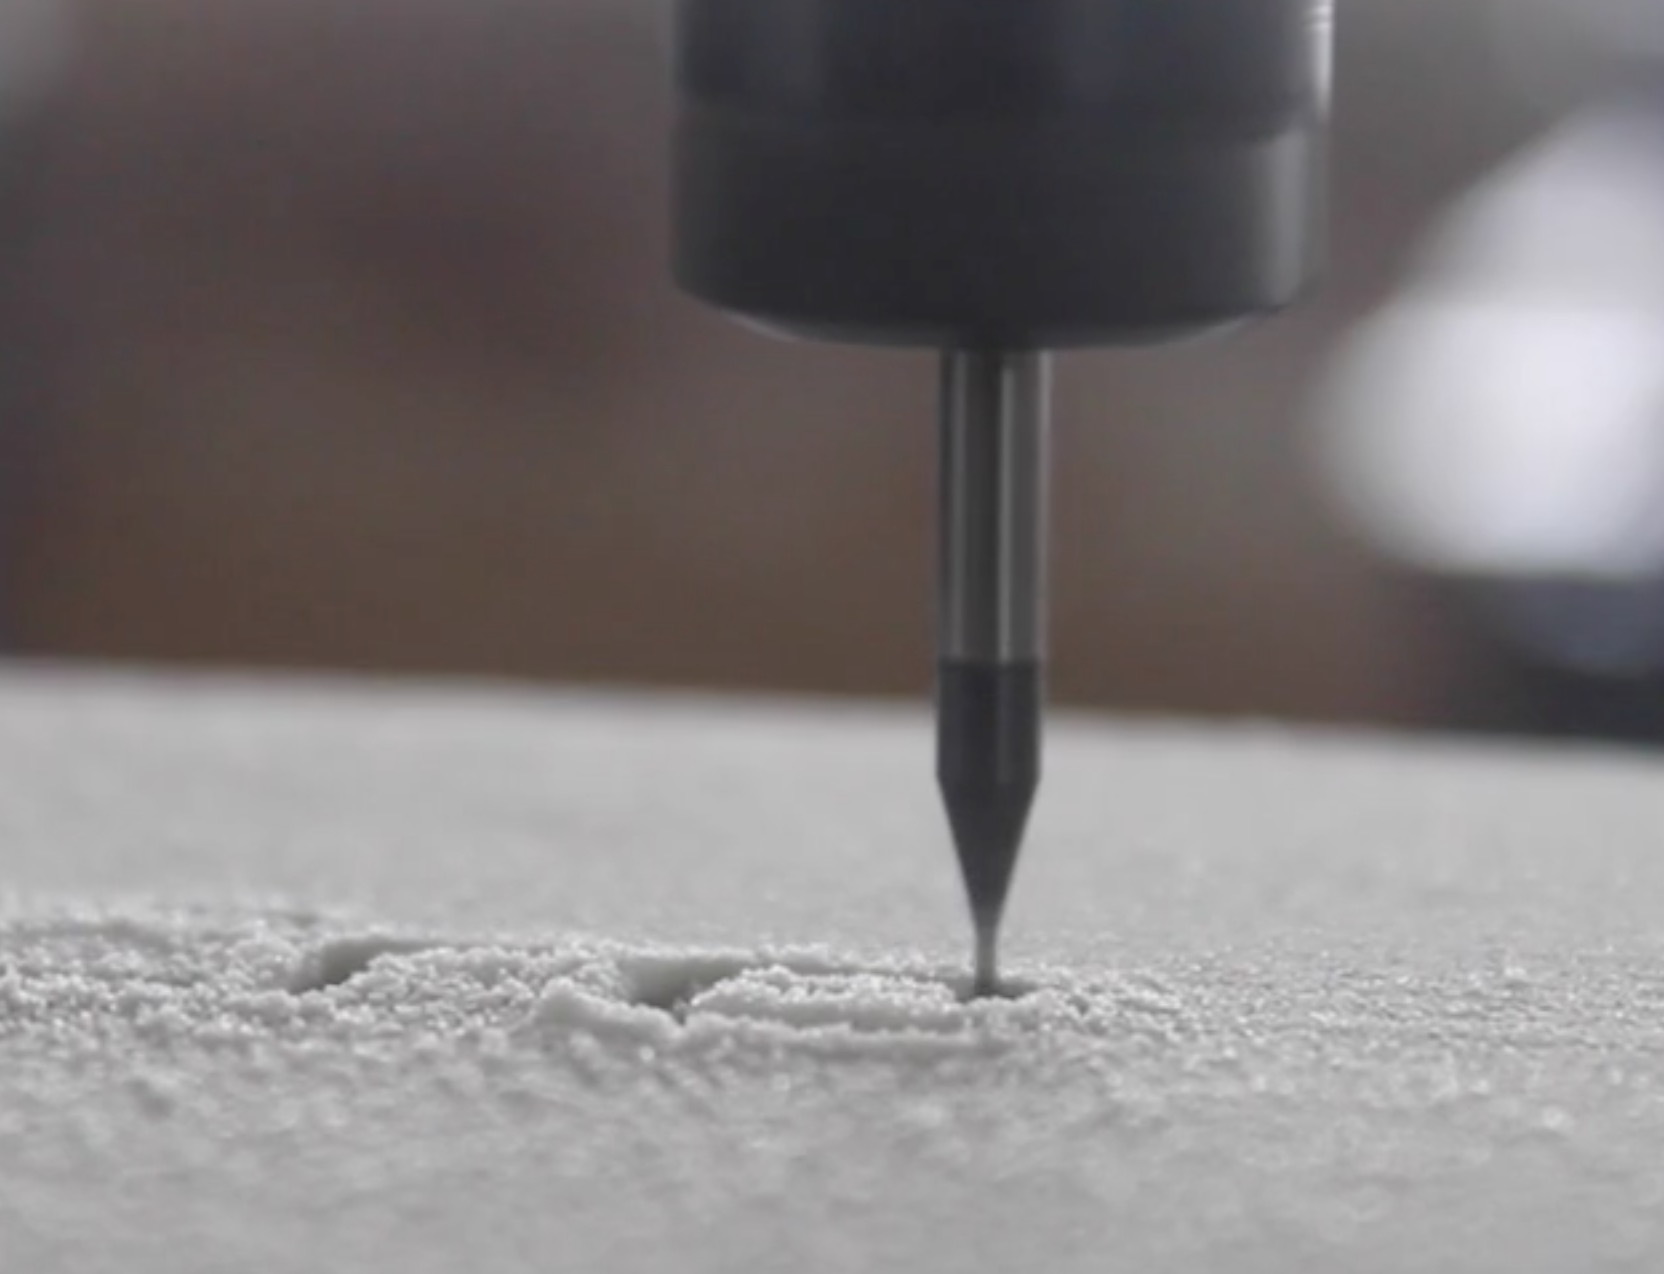  The Versa3D's milling tool in action 